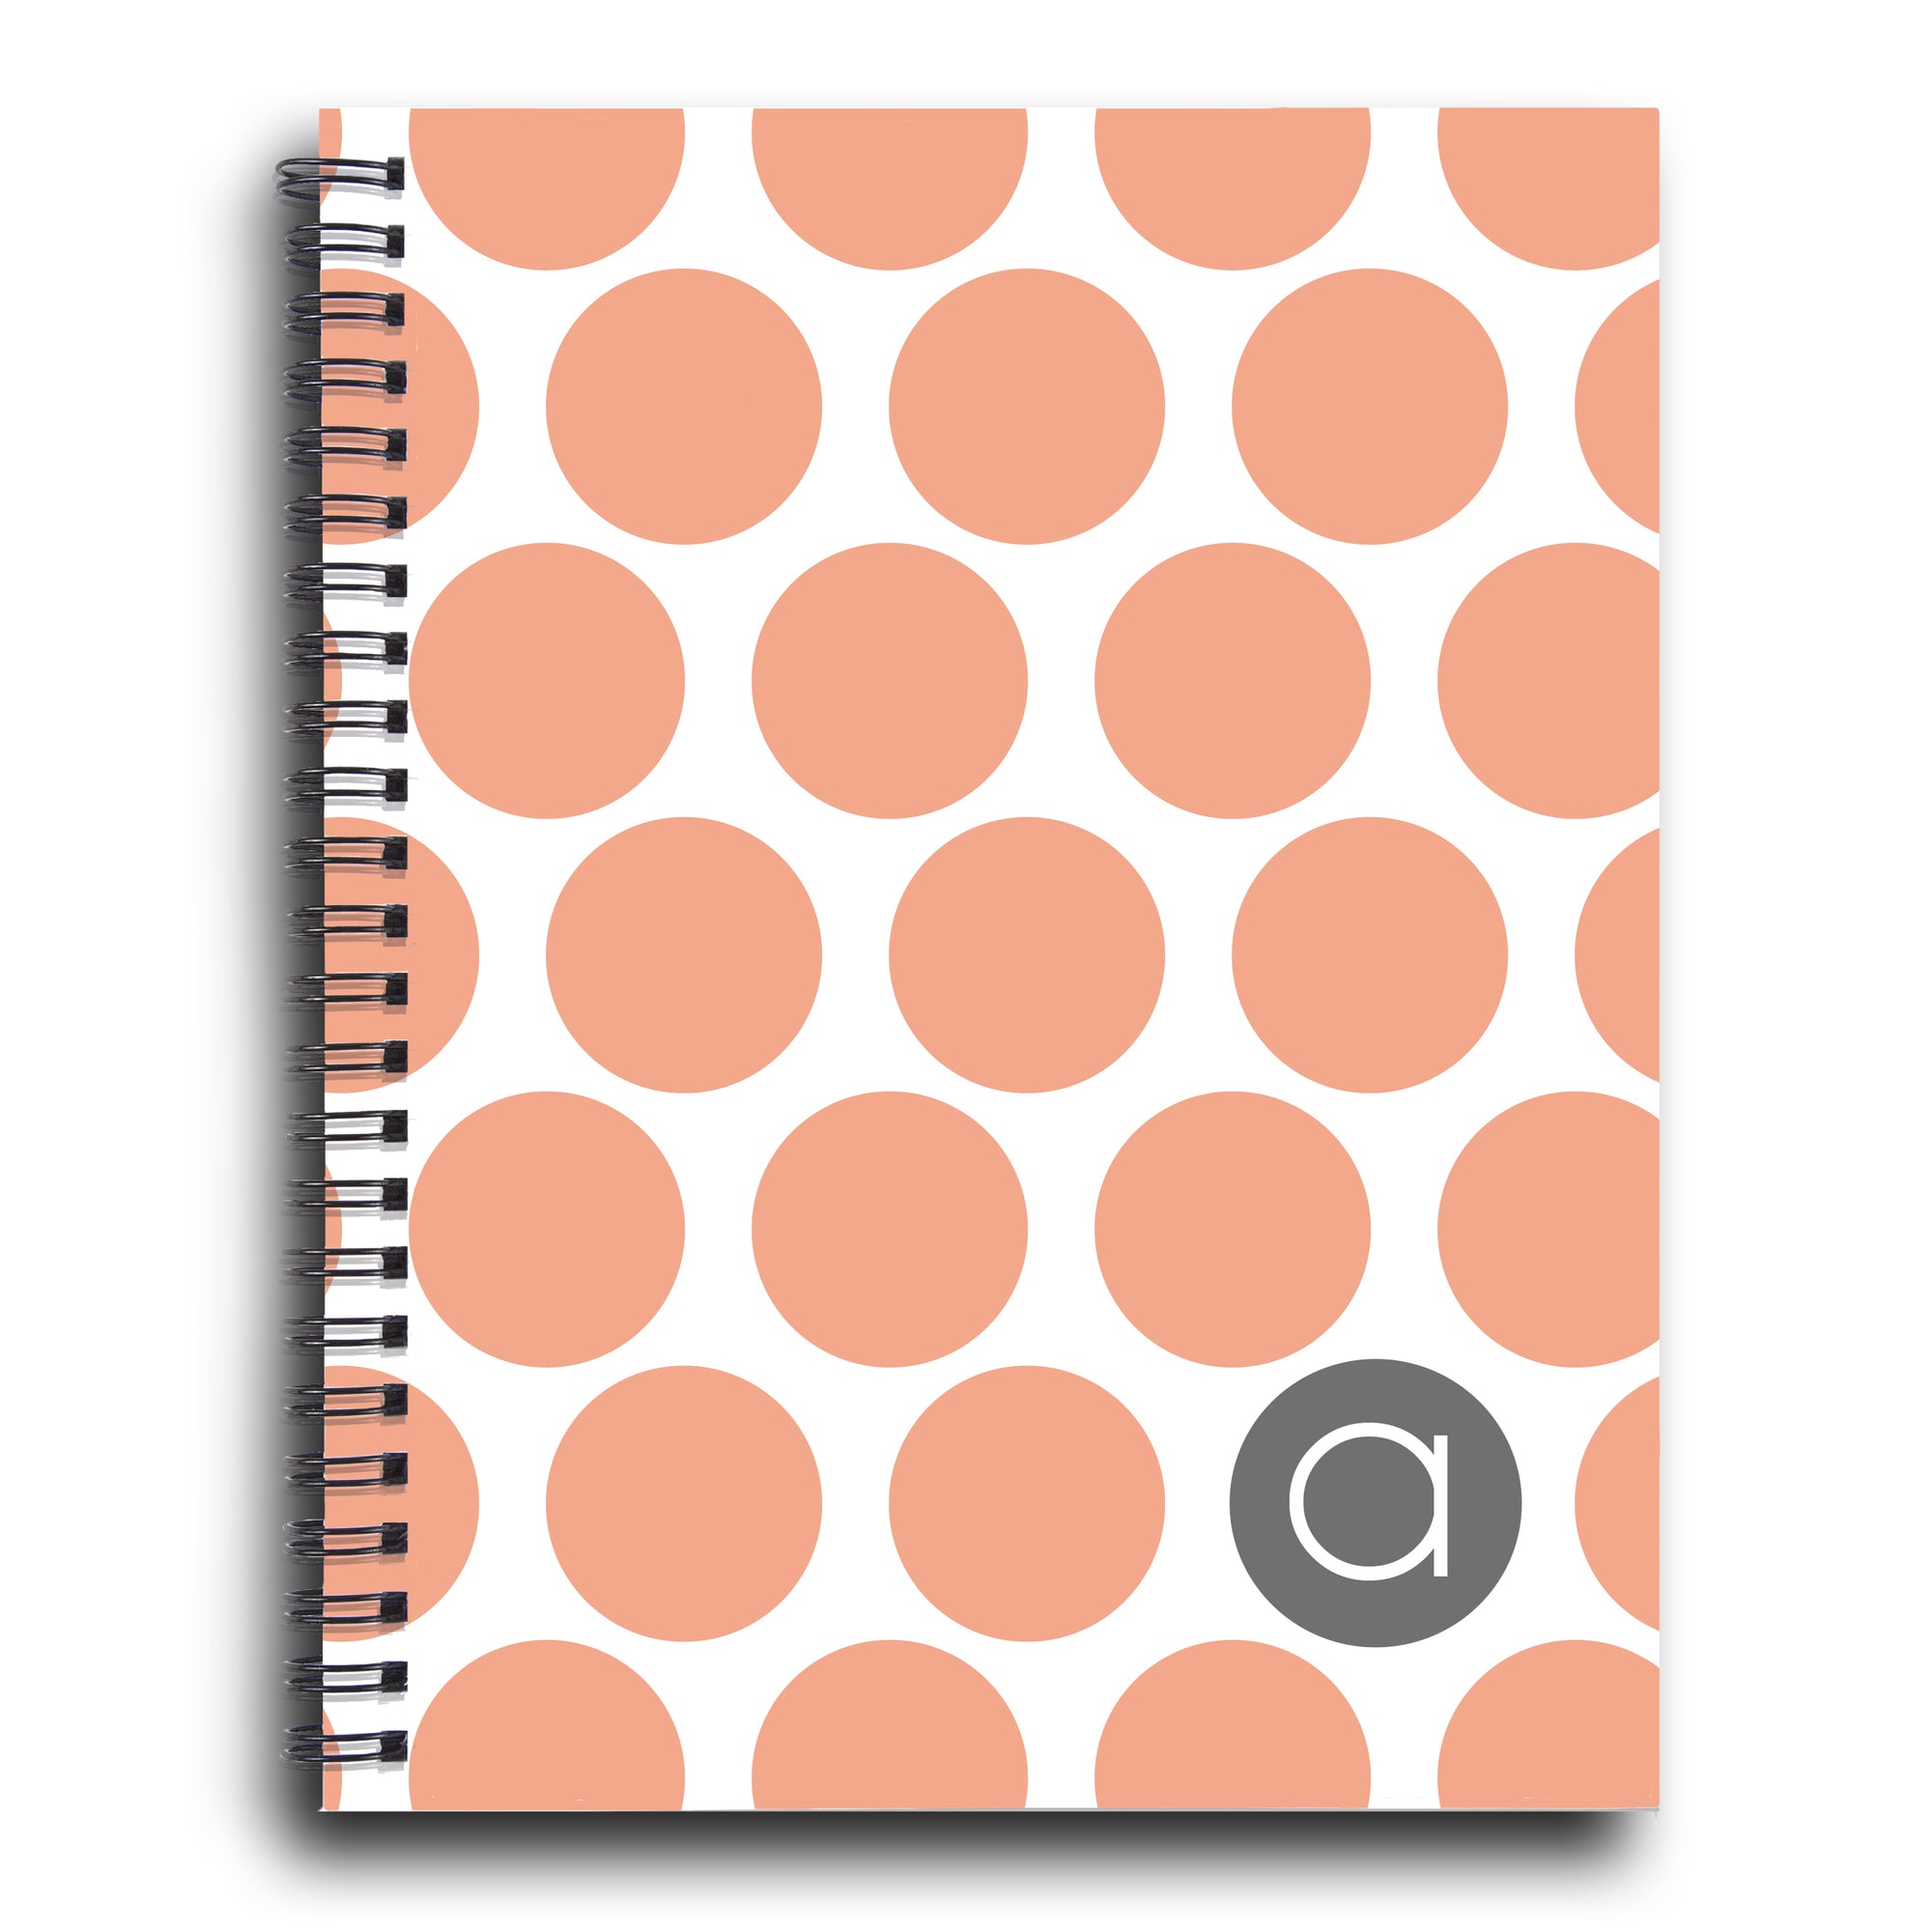 Big dotty Spiral Notebook, Peach and Gray, Personalized, PIPSY.COM